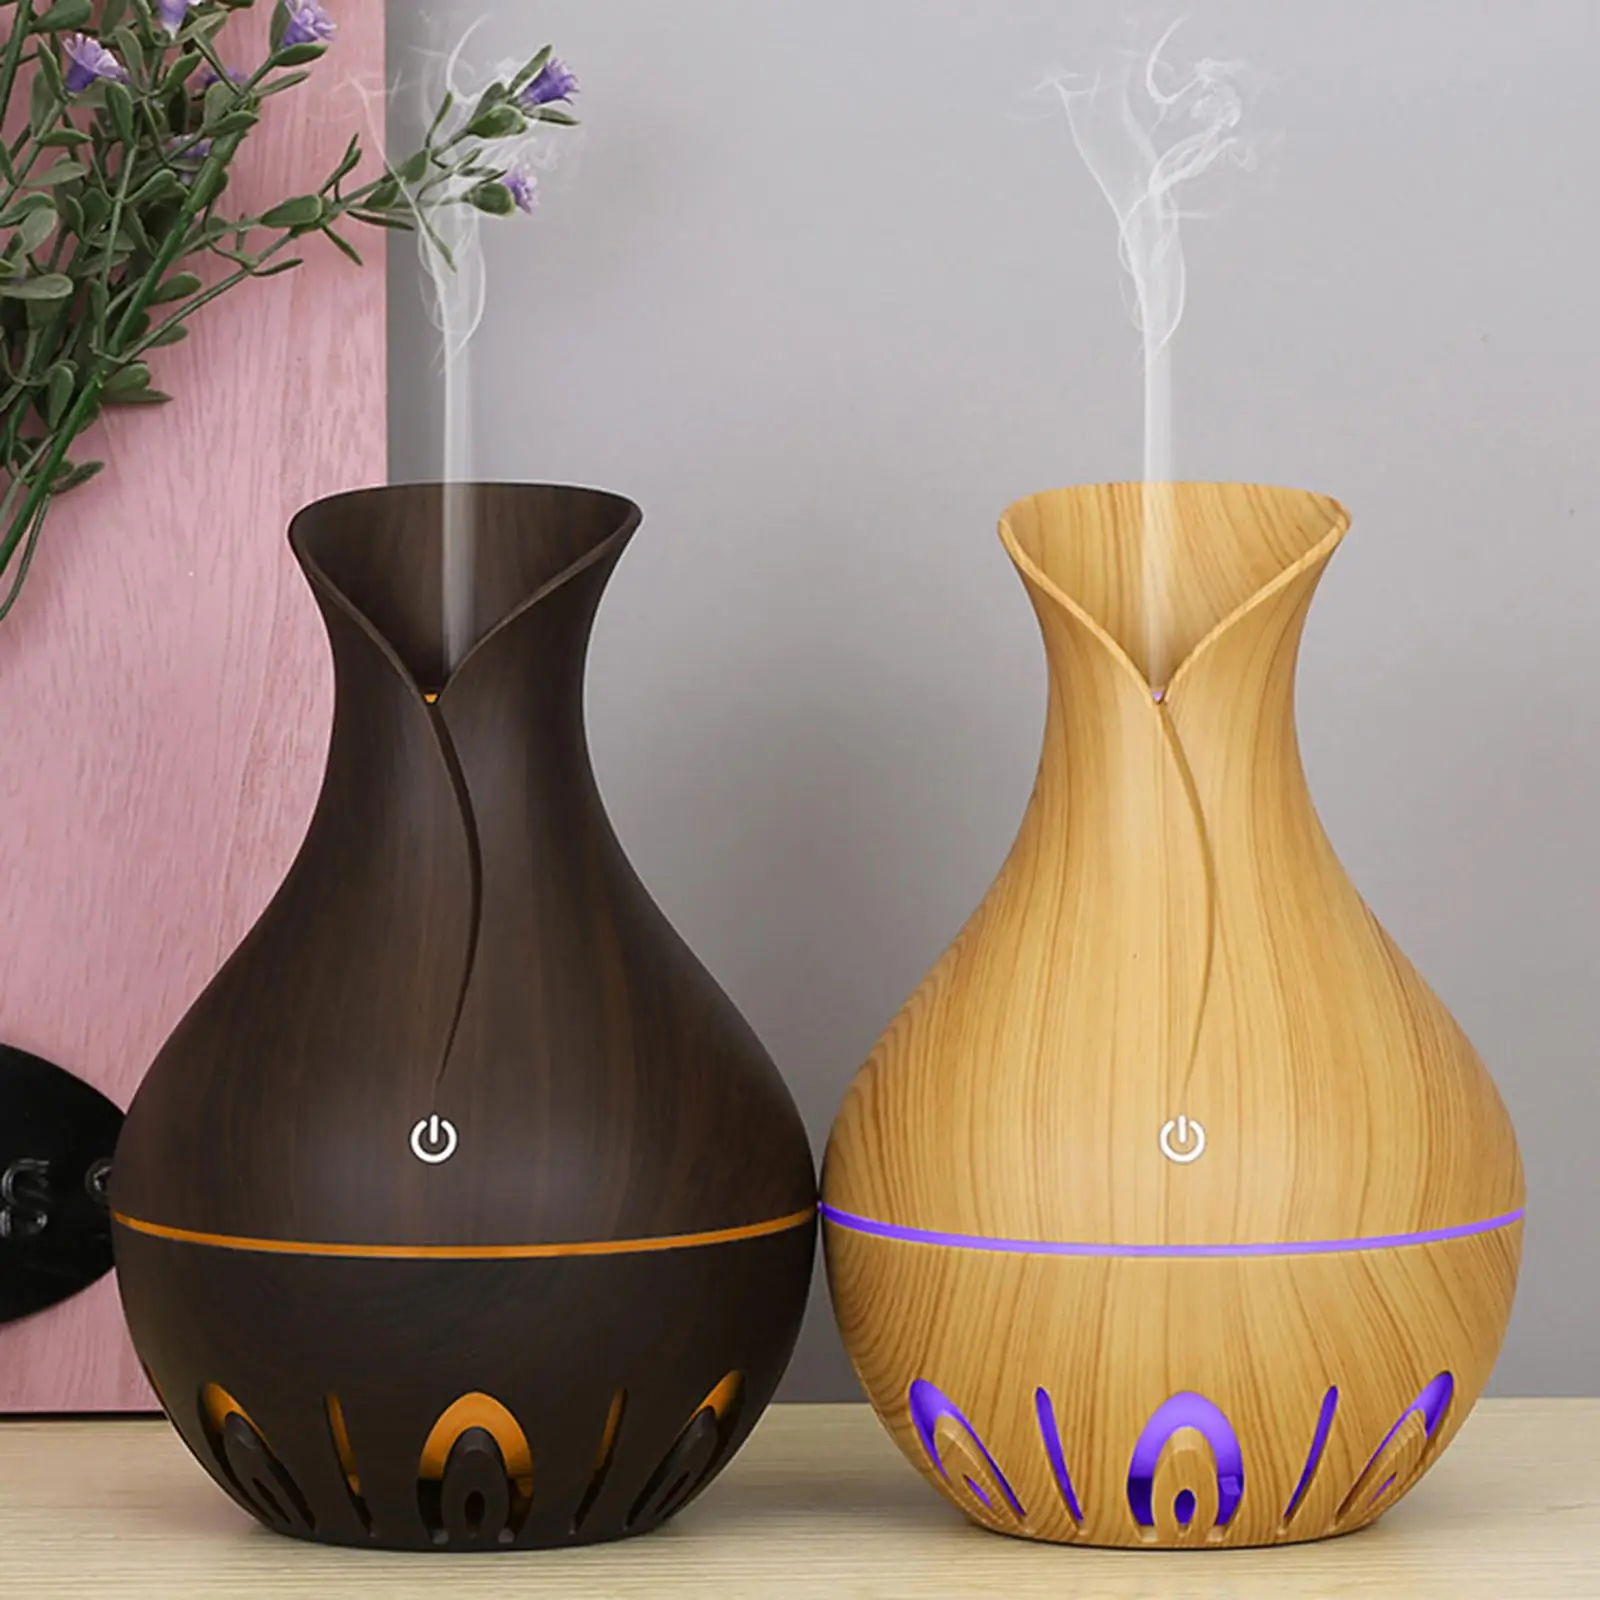 Portable Essential Oil Diffuser Ultrasonic LED Lamp Purifier Cool Mist Aroma USB Whisper Mini Humidifier for Gifts Bedroom Car